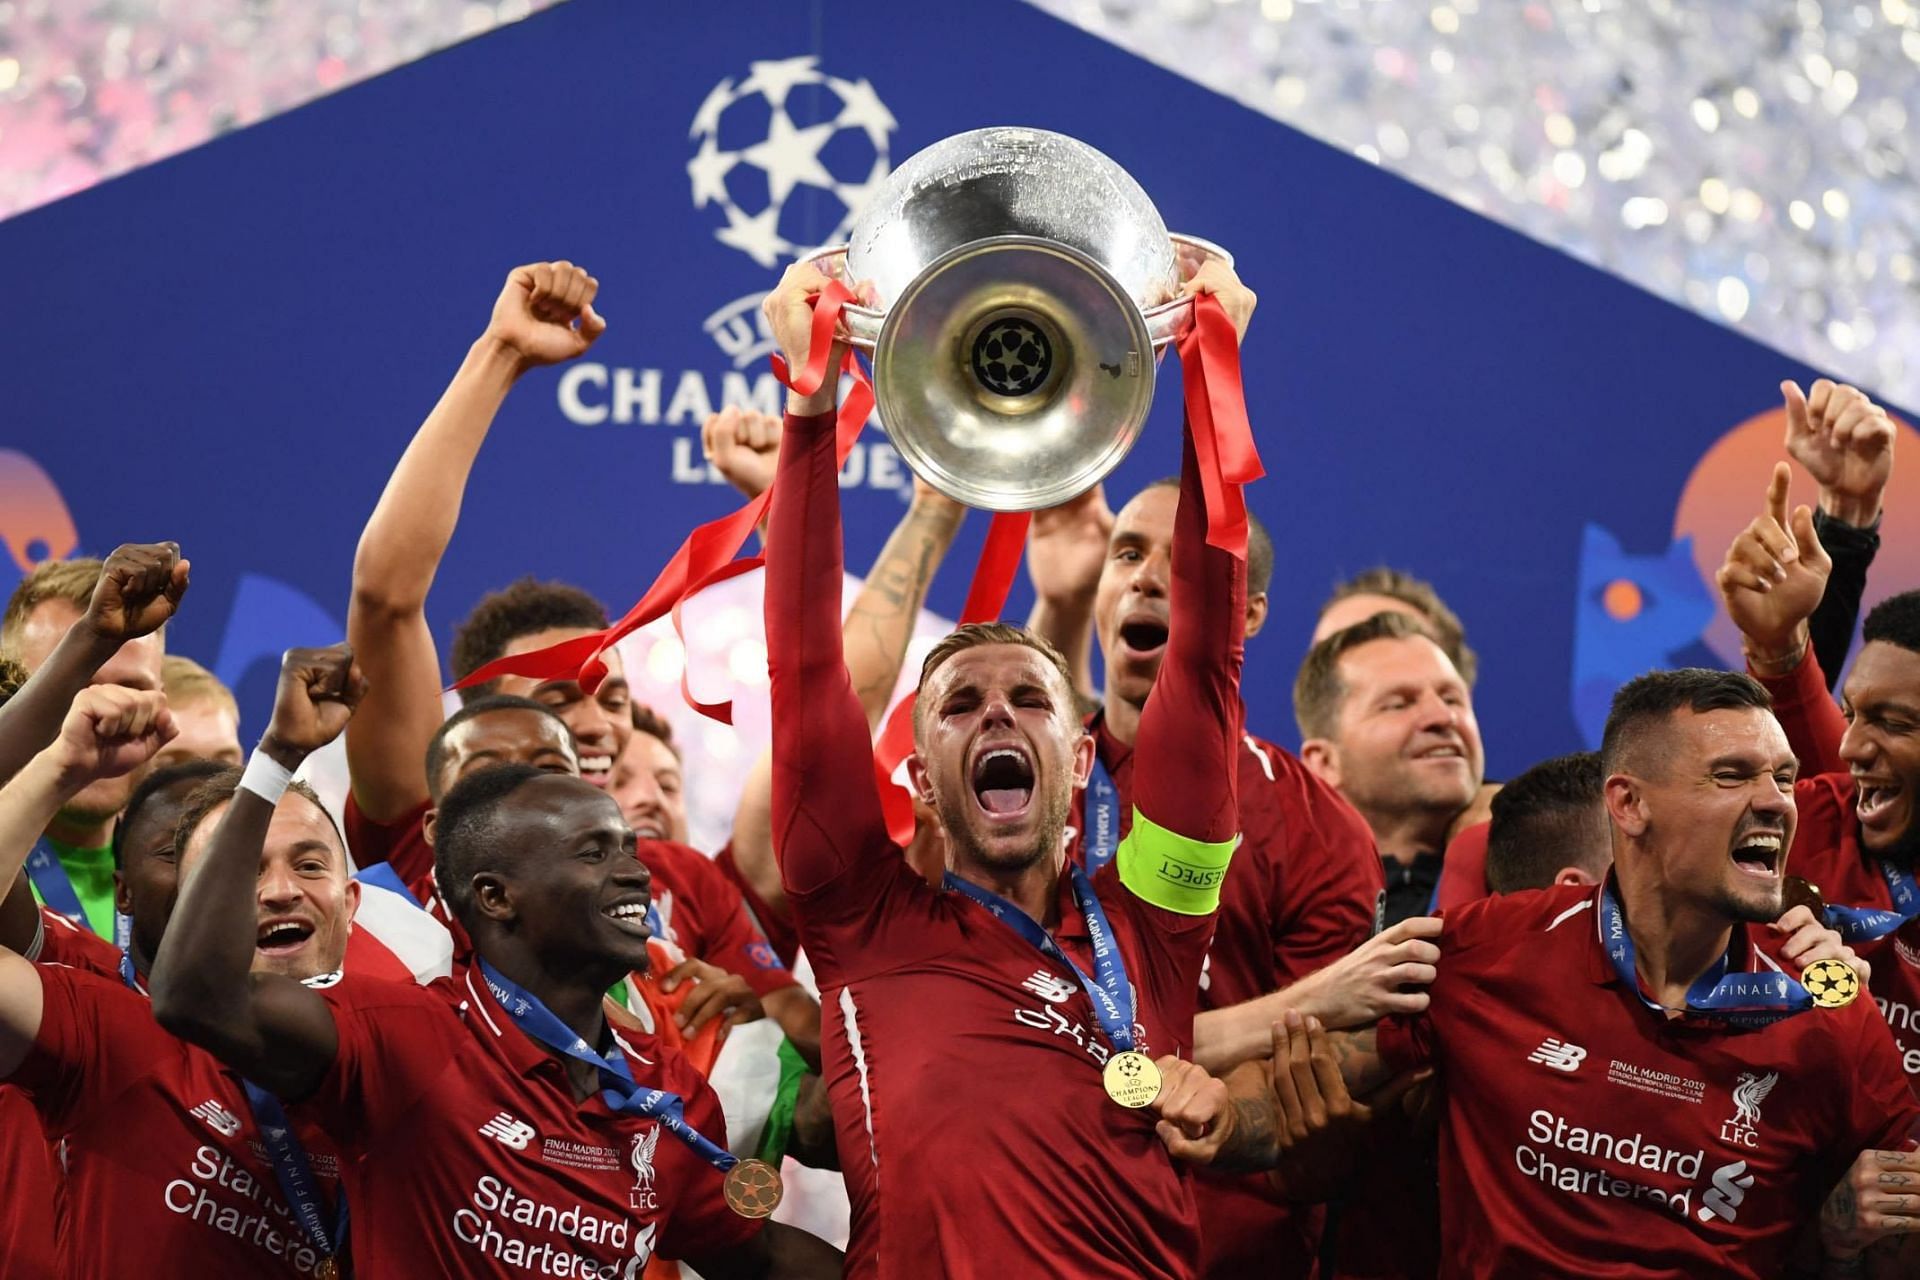 Liverpool players celebrate after winning the 2018-19 Champions League title (cred: CNN).